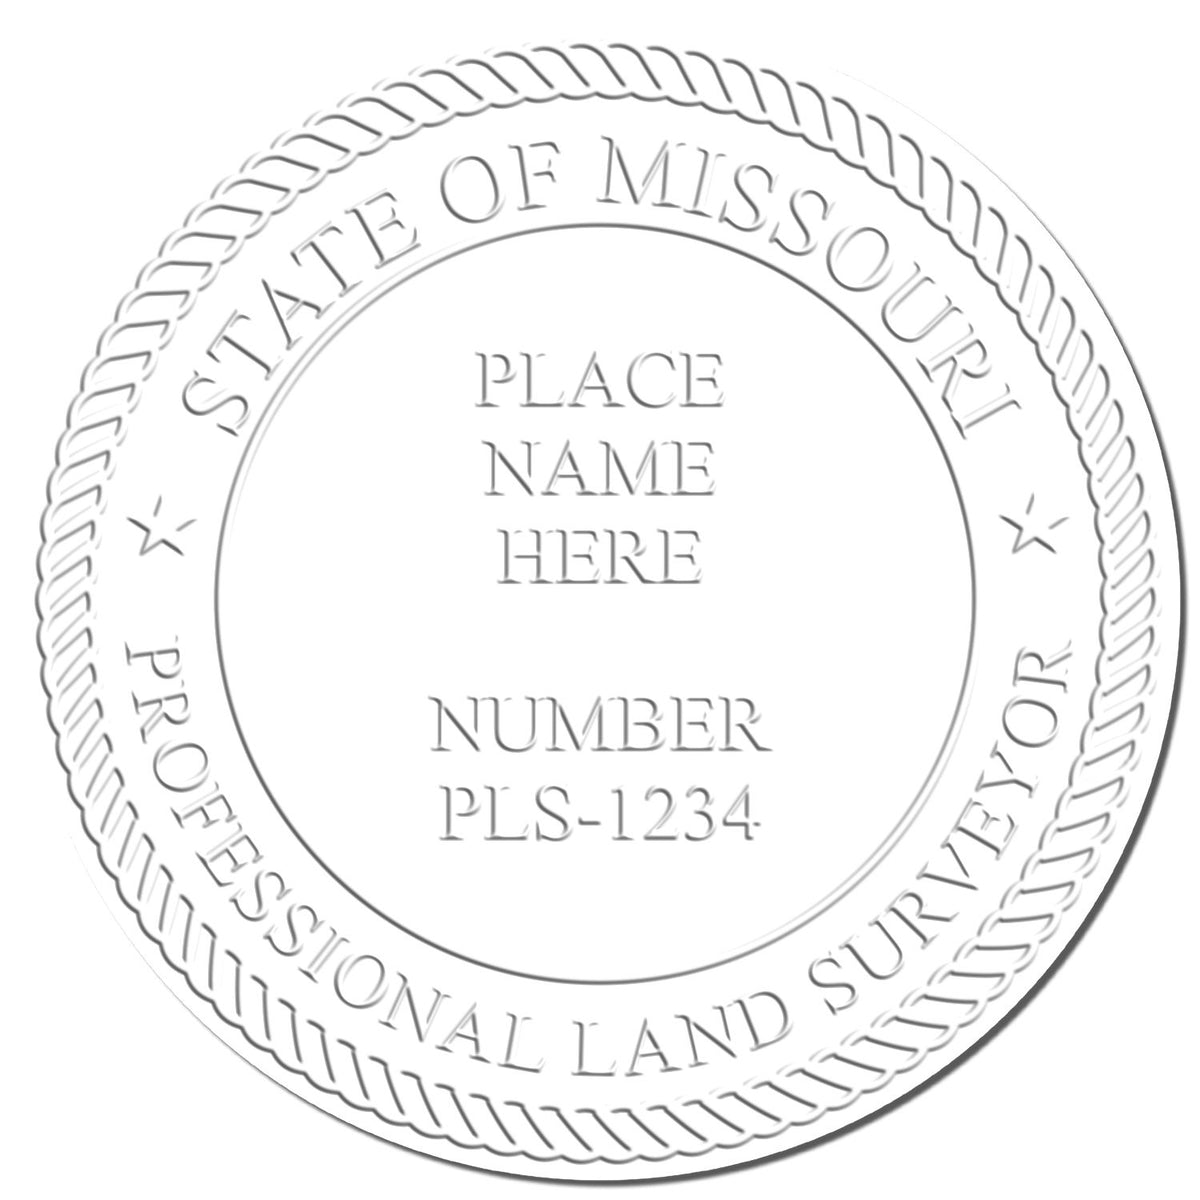 This paper is stamped with a sample imprint of the Long Reach Missouri Land Surveyor Seal, signifying its quality and reliability.